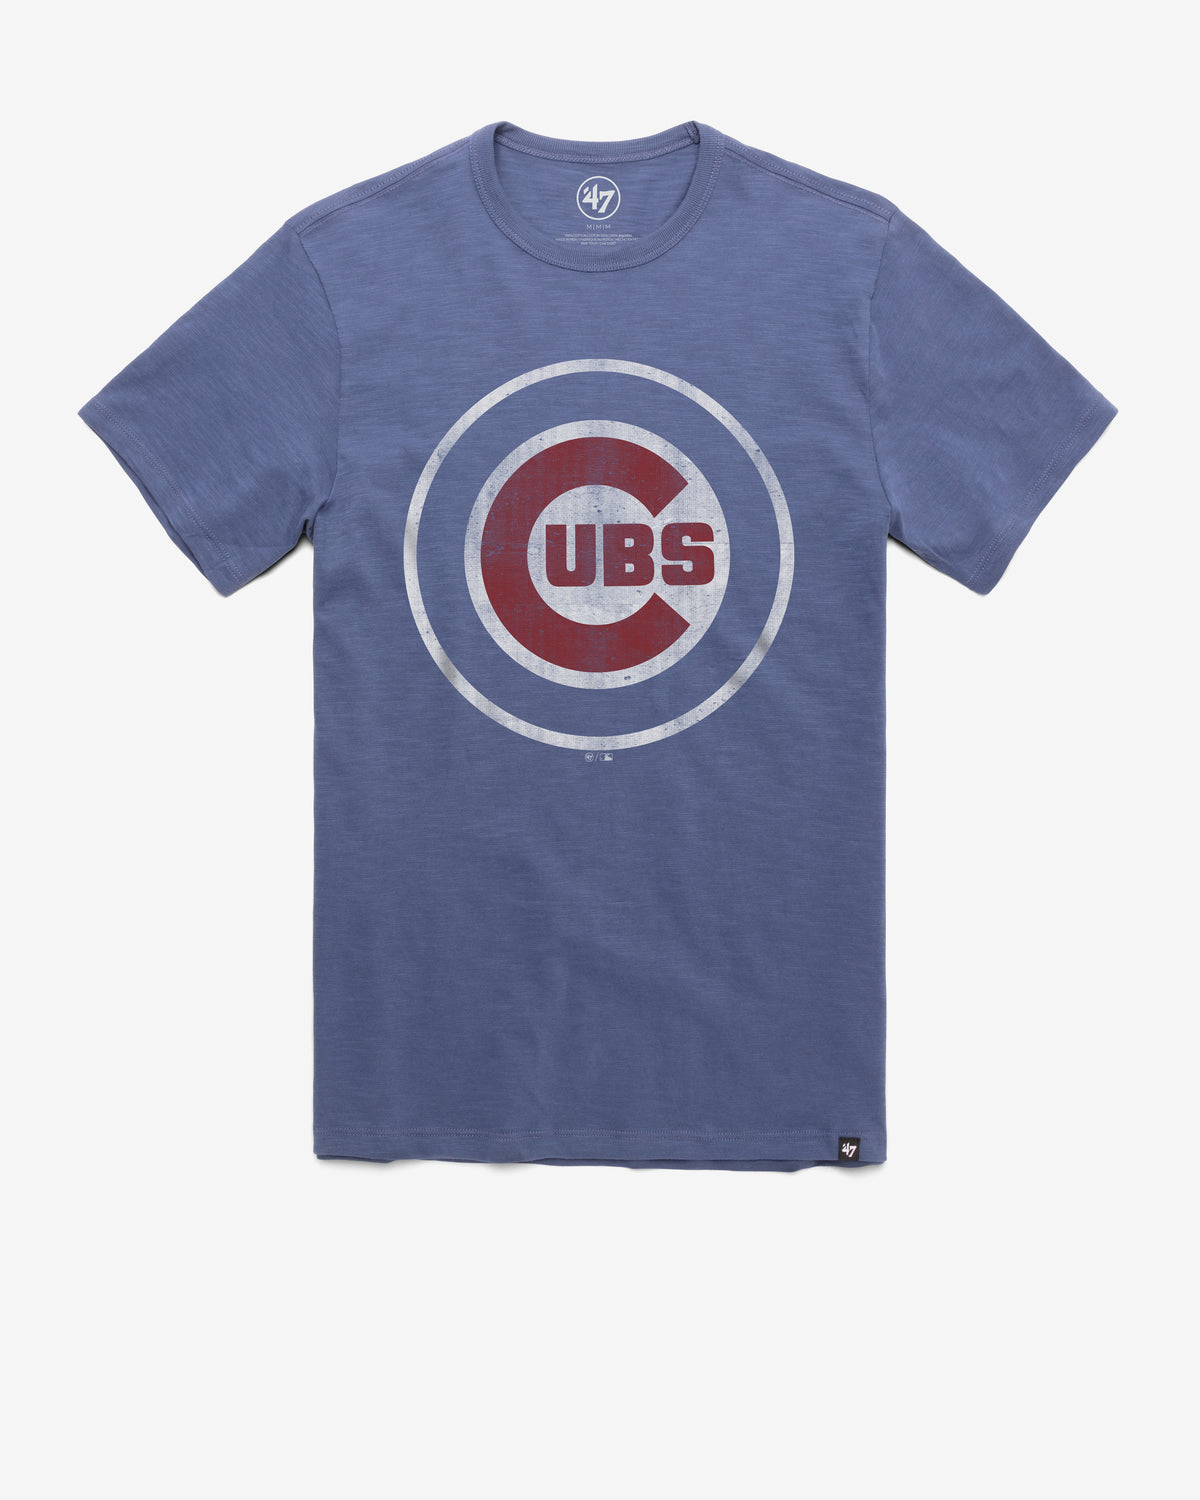 CHICAGO CUBS GRIT '47 SCRUM TEE